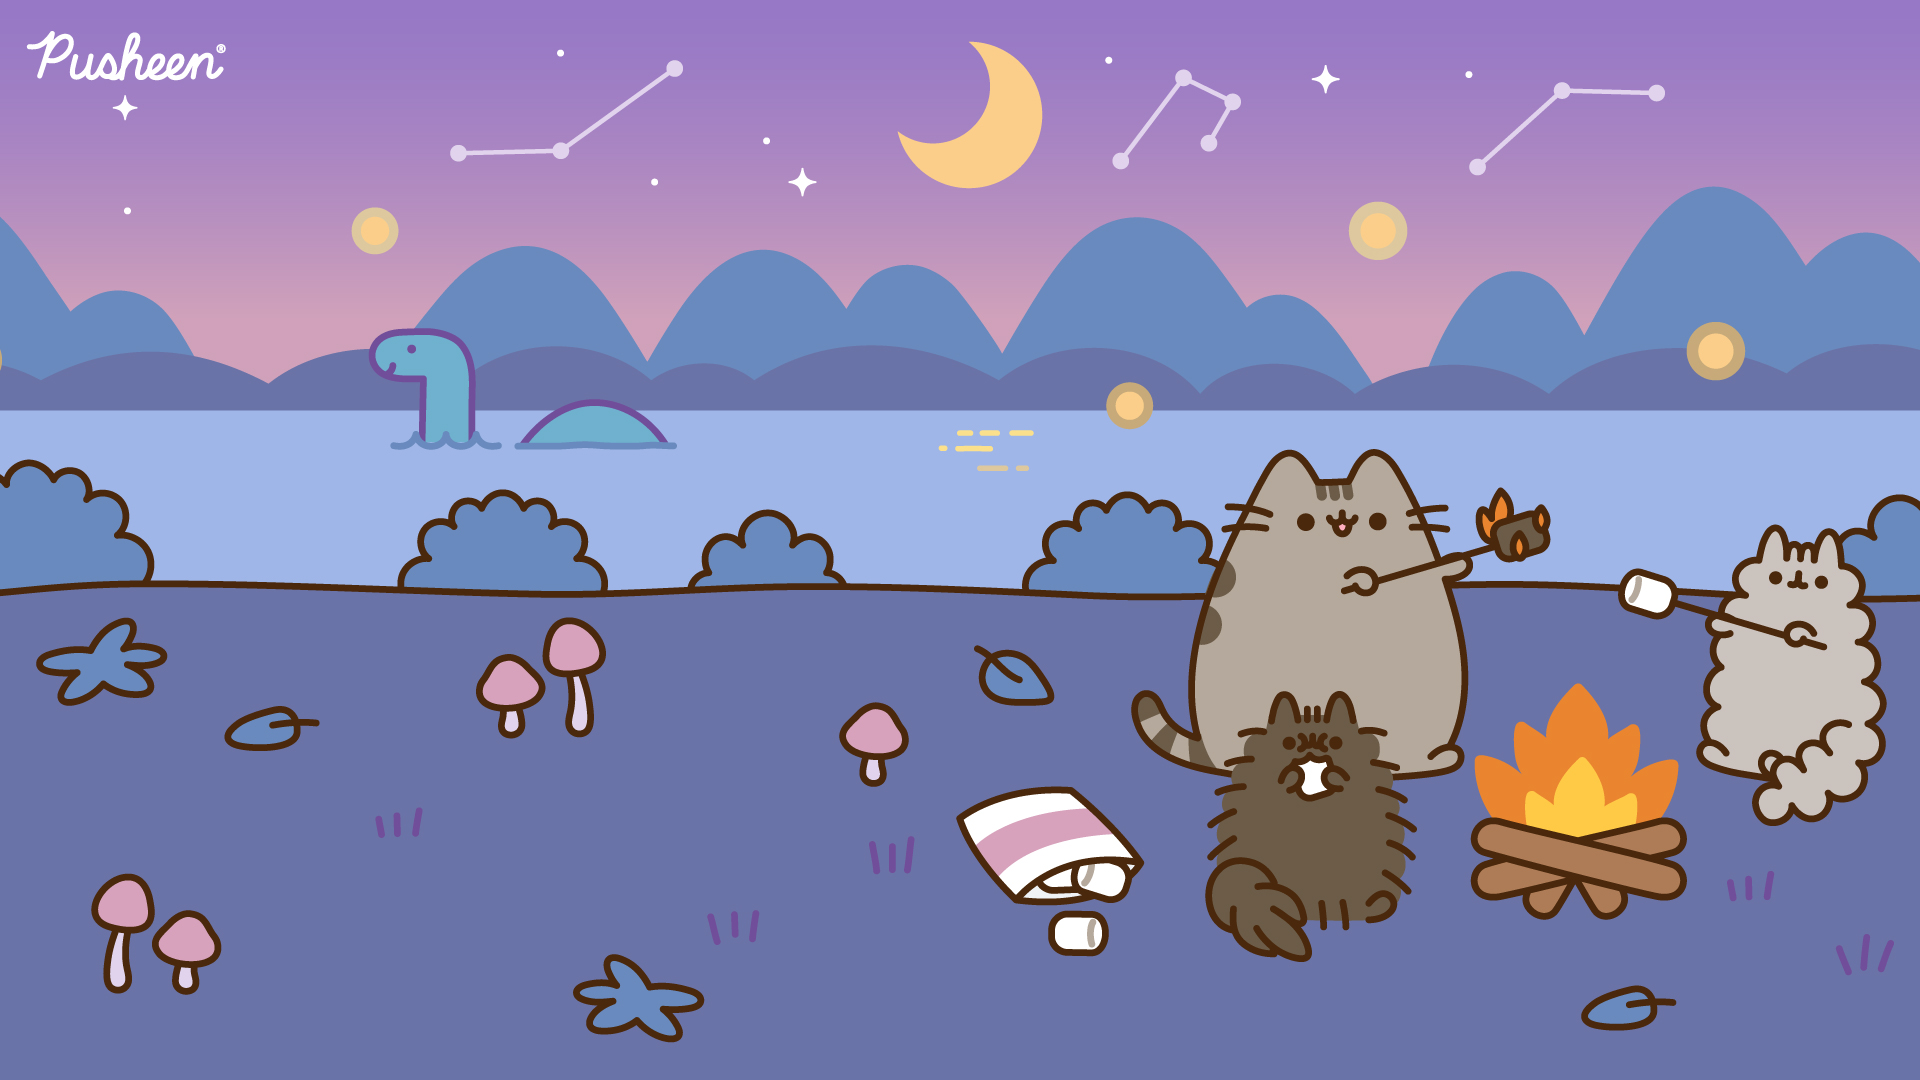 Some Halloween Pusheen Cat I call Pusheen The Facebook Cat Wallpapers I  found on Google  rphonewallpapers